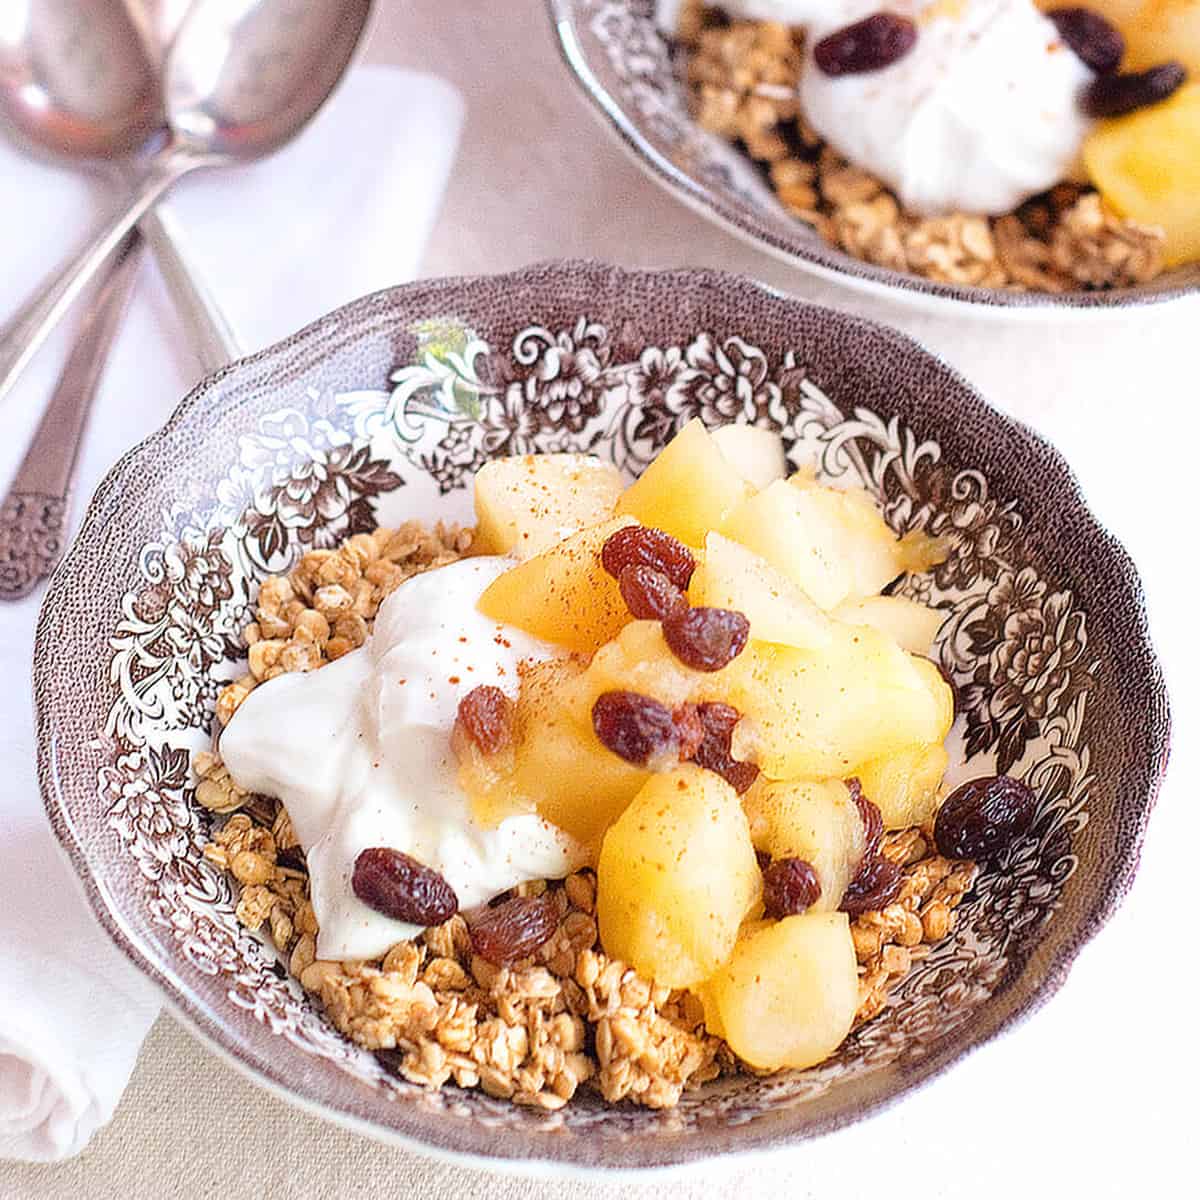 Apple Pear Compote with Yogurt and Granola